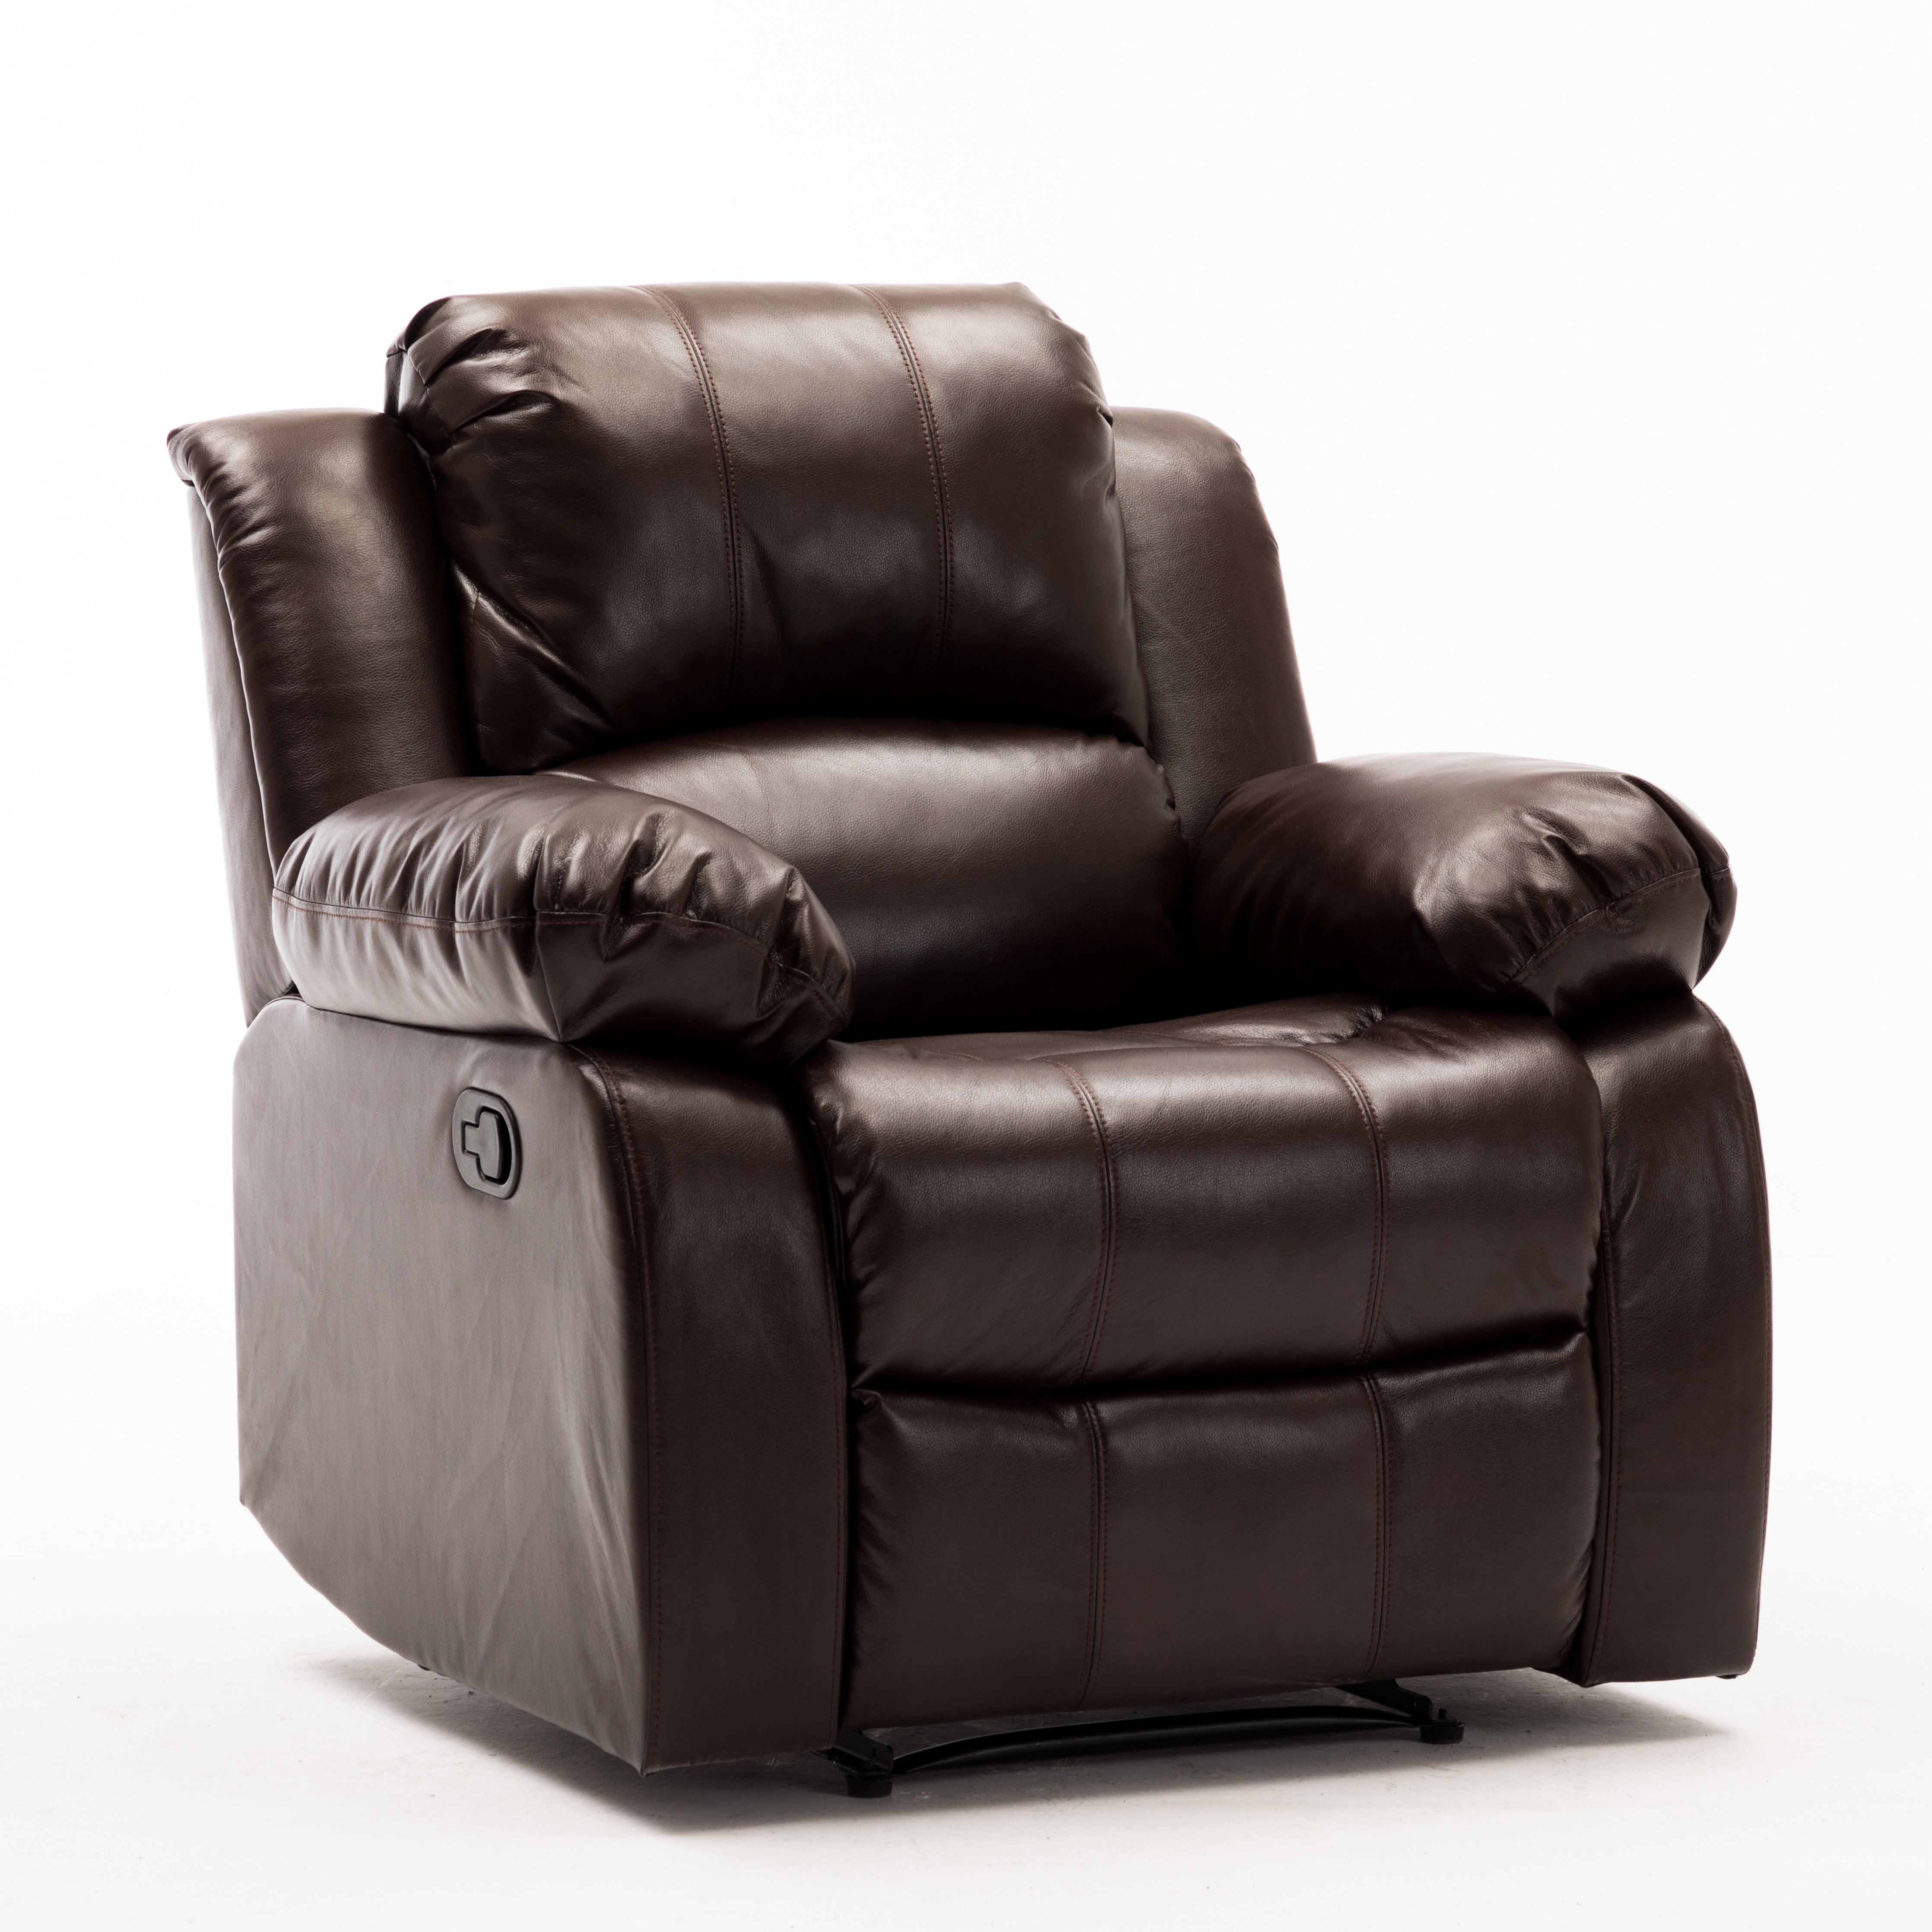 Recliner Chair Air Leather Recliner Chair Overstuffed Faux Leather Home Theater Seating Single Reclining Manaul Sofa For Living Room And Bedroombrown Walmartcom Walmartcom